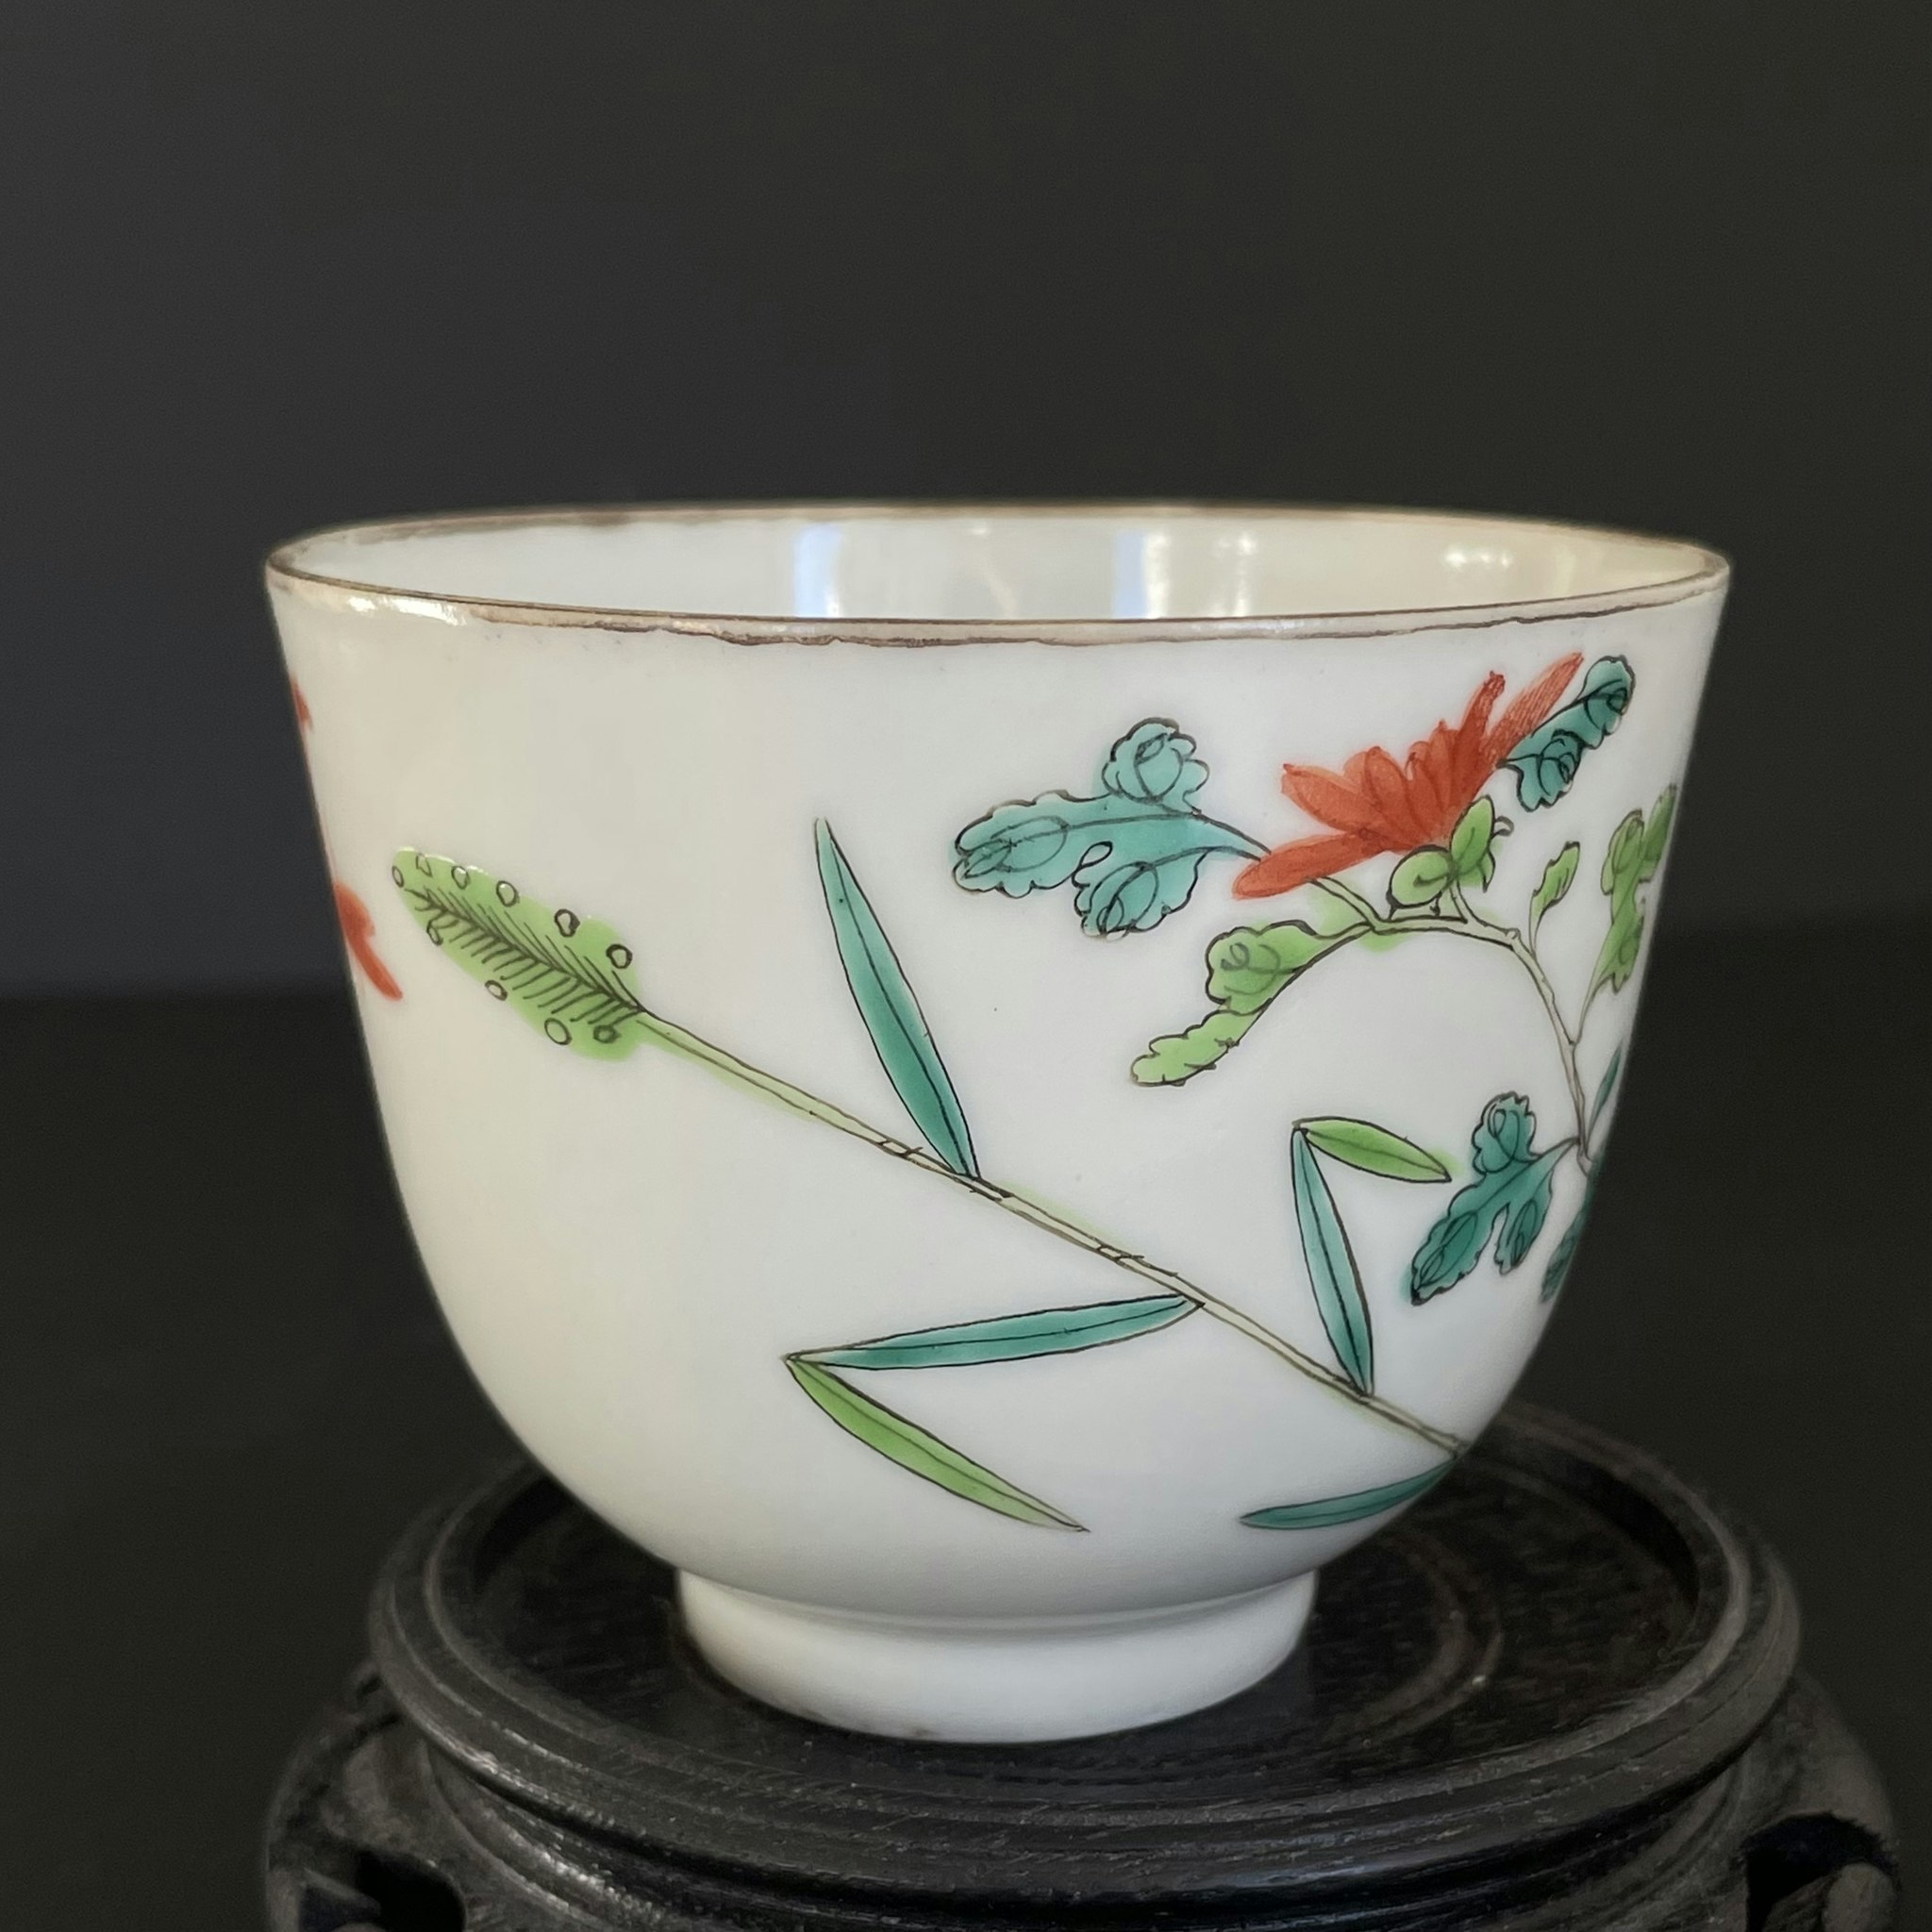 Chinese antique porcelain teacup, Late Qing Dynasty, #1731